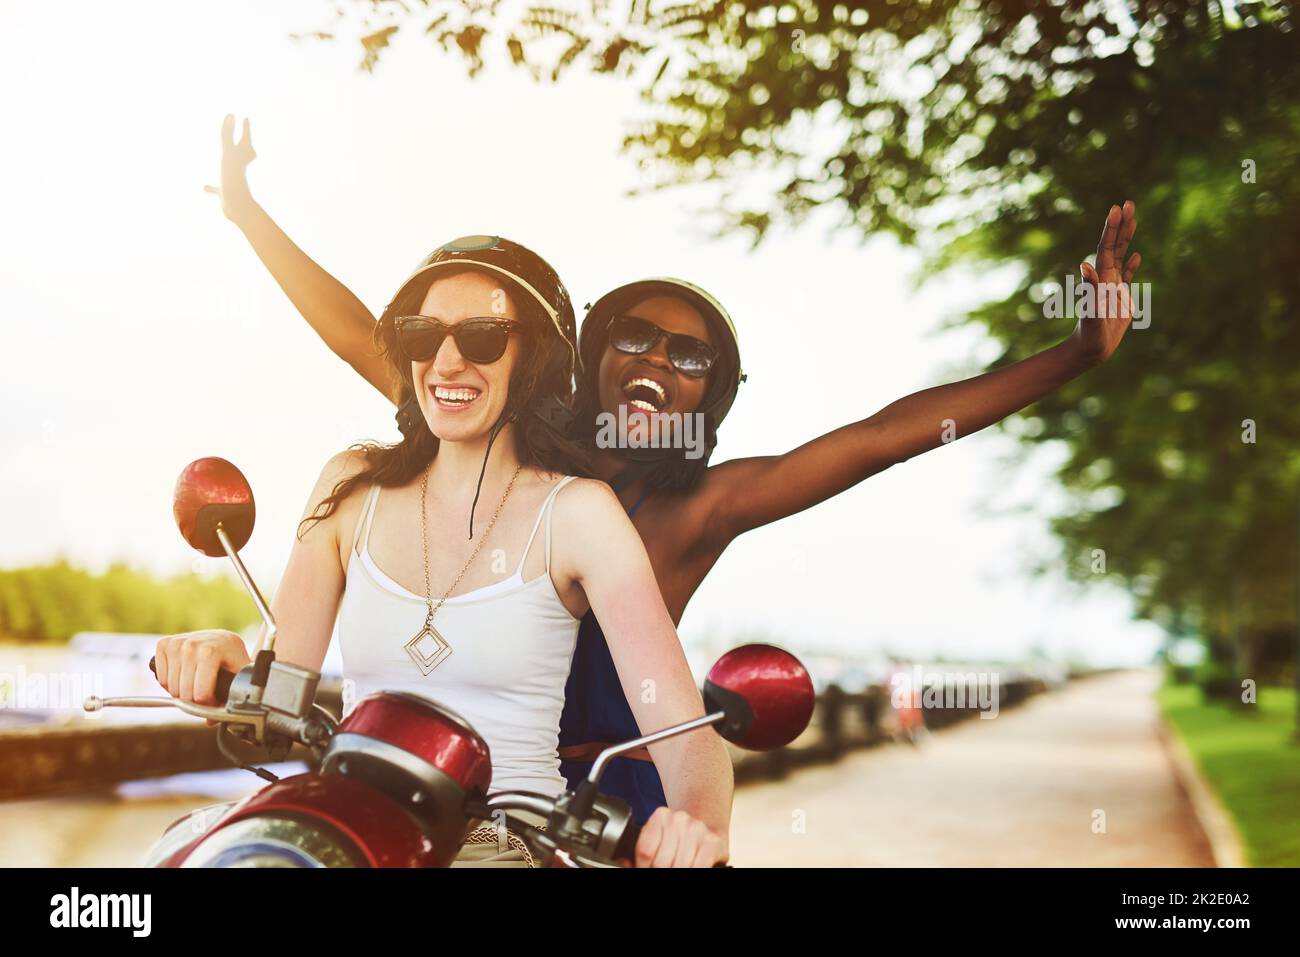 Loving the wind in their hair. Shot of two friends enjoying a ride on a scooter together. Stock Photo